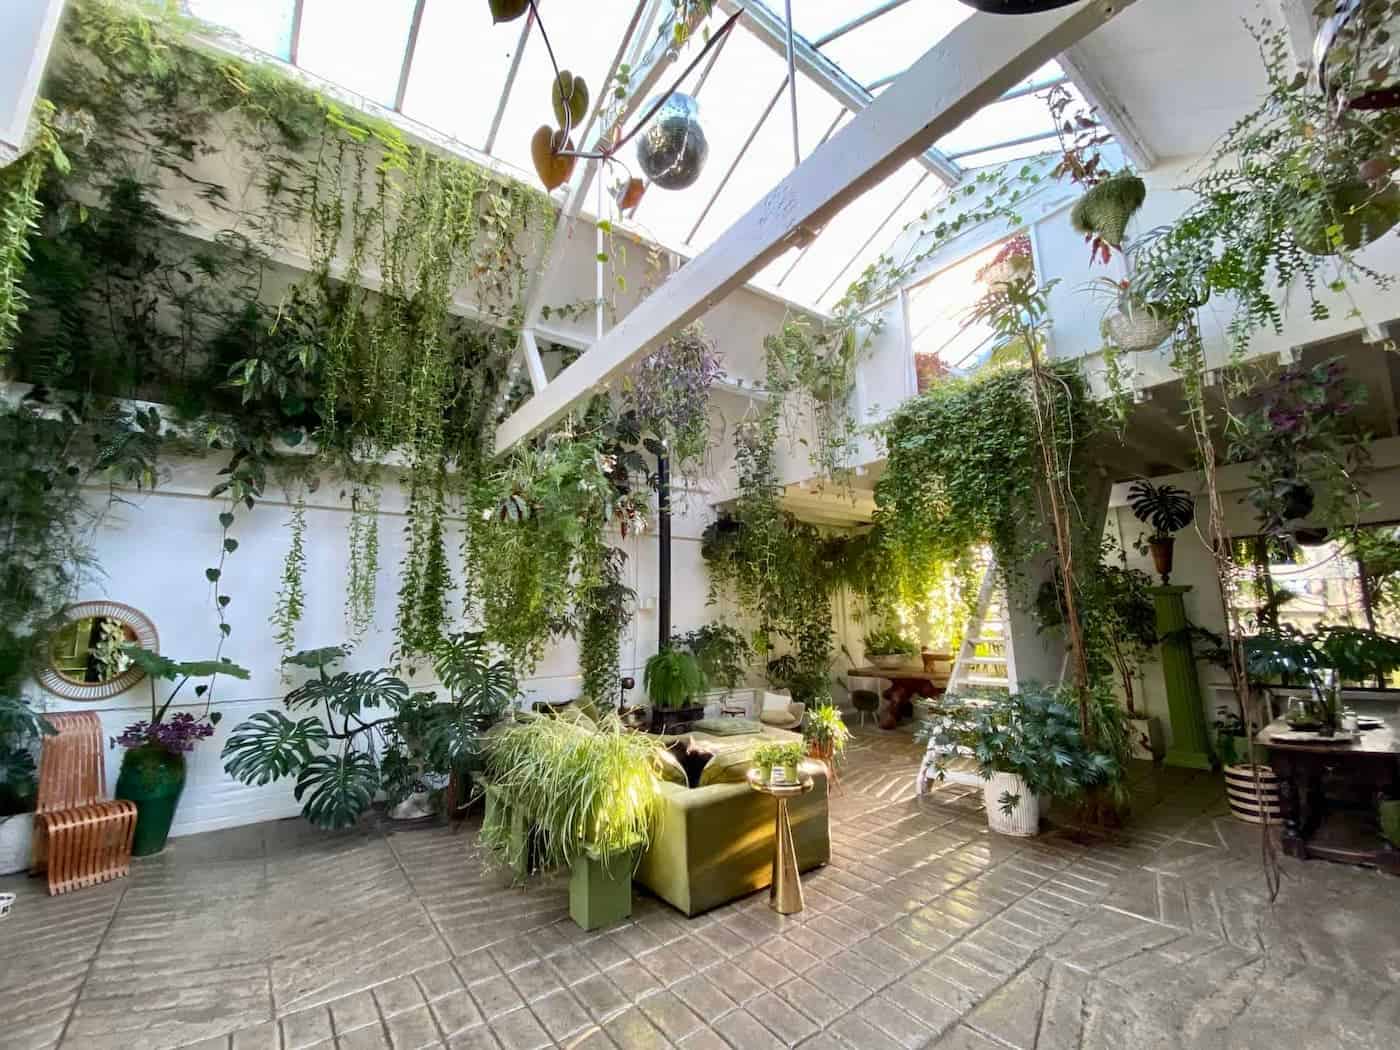 Tram Shed - Botanical Location in London - The Location Guys